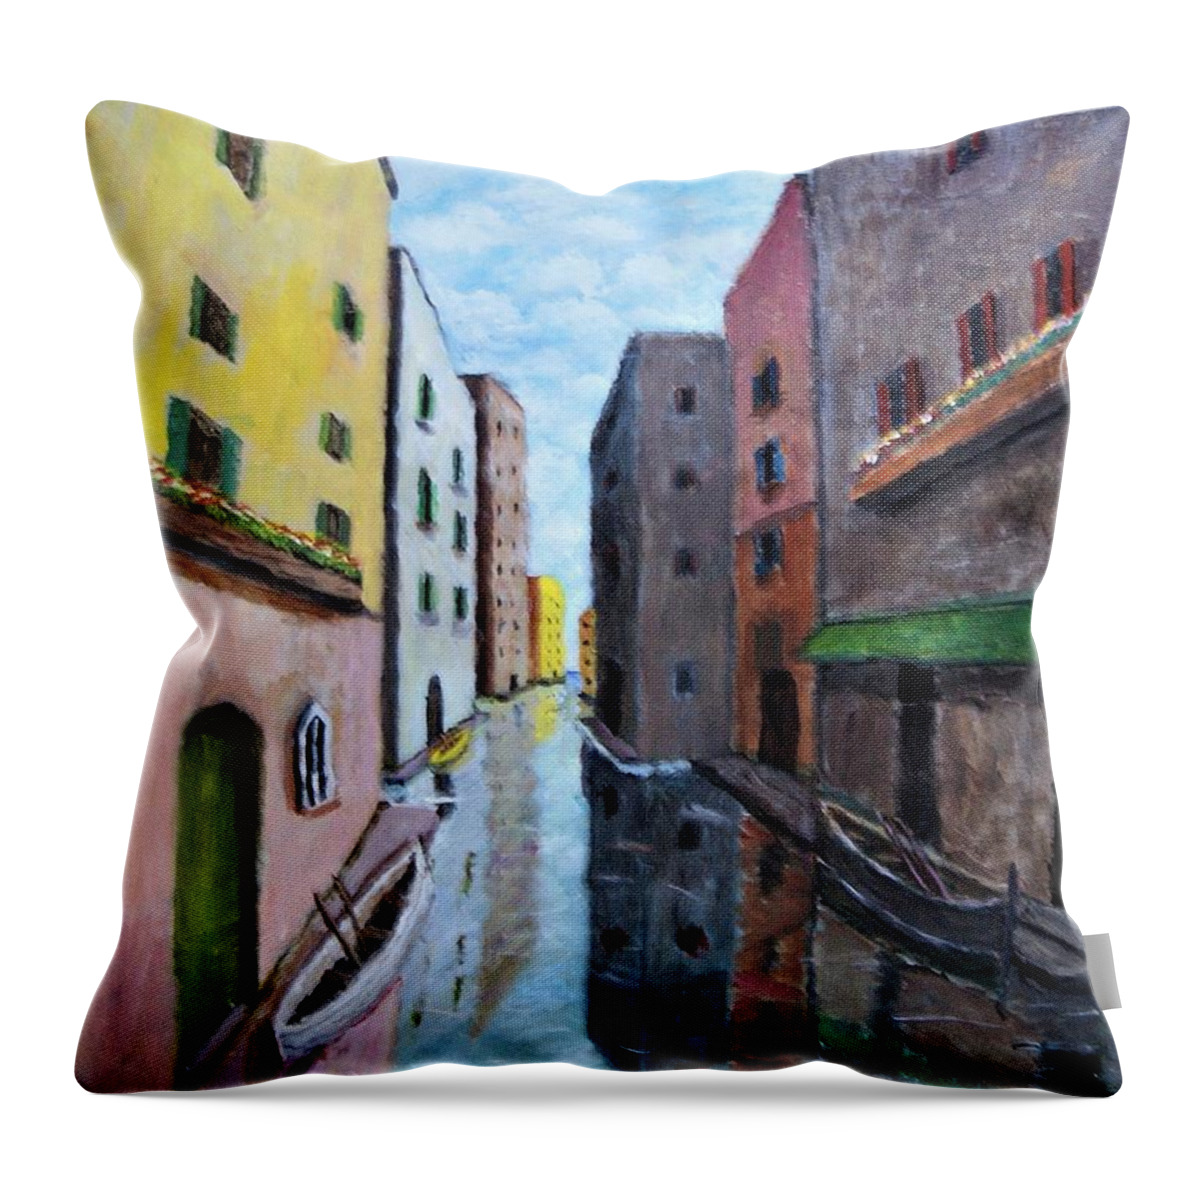 Landscape Throw Pillow featuring the painting Canal Street Apartments by Gregory Dorosh